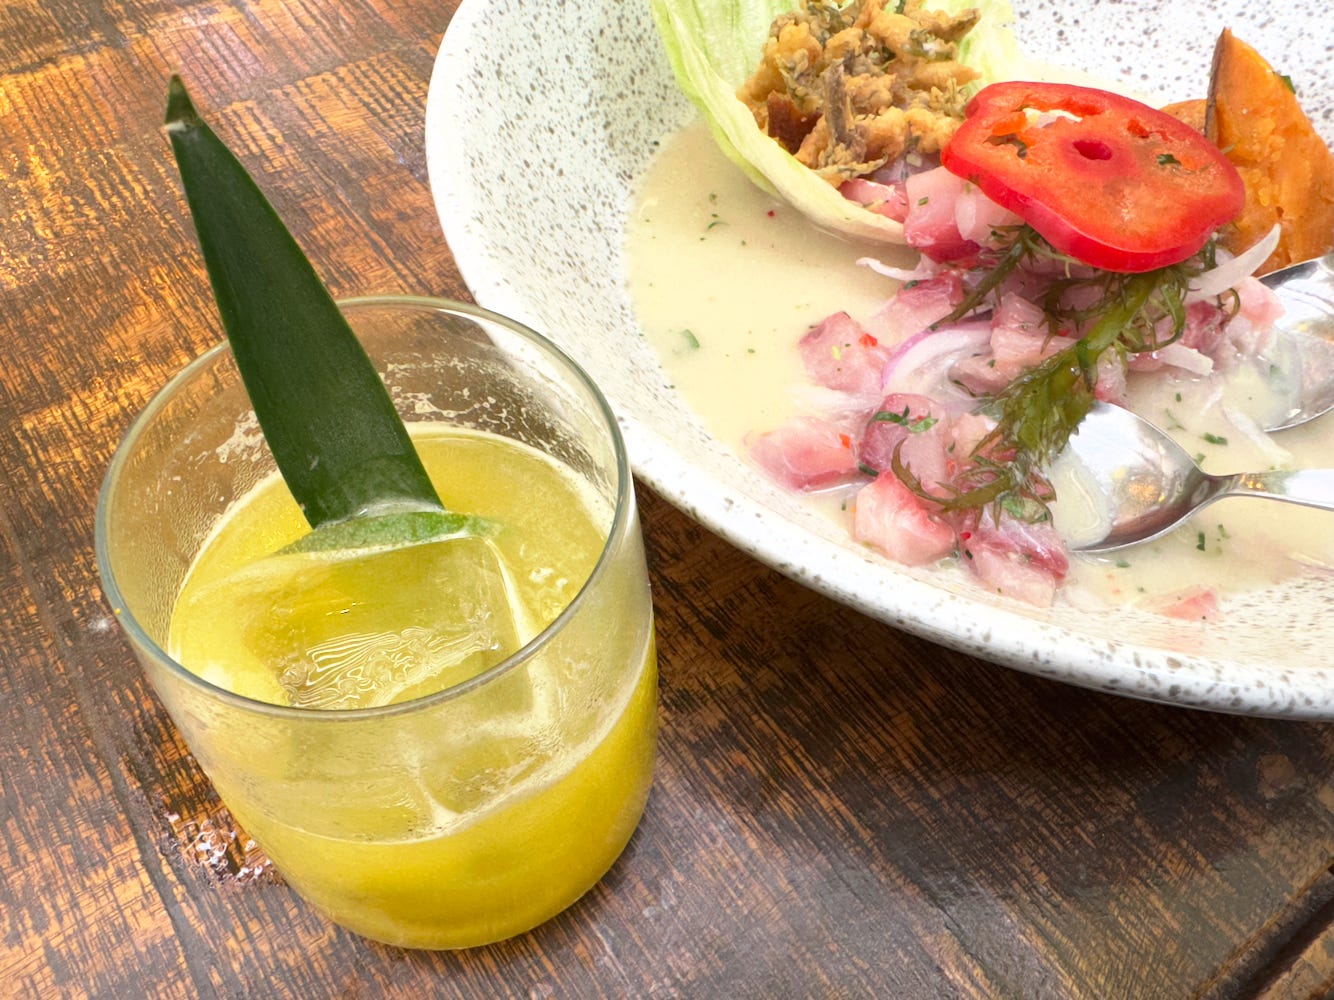 Pisco punch and ceviche